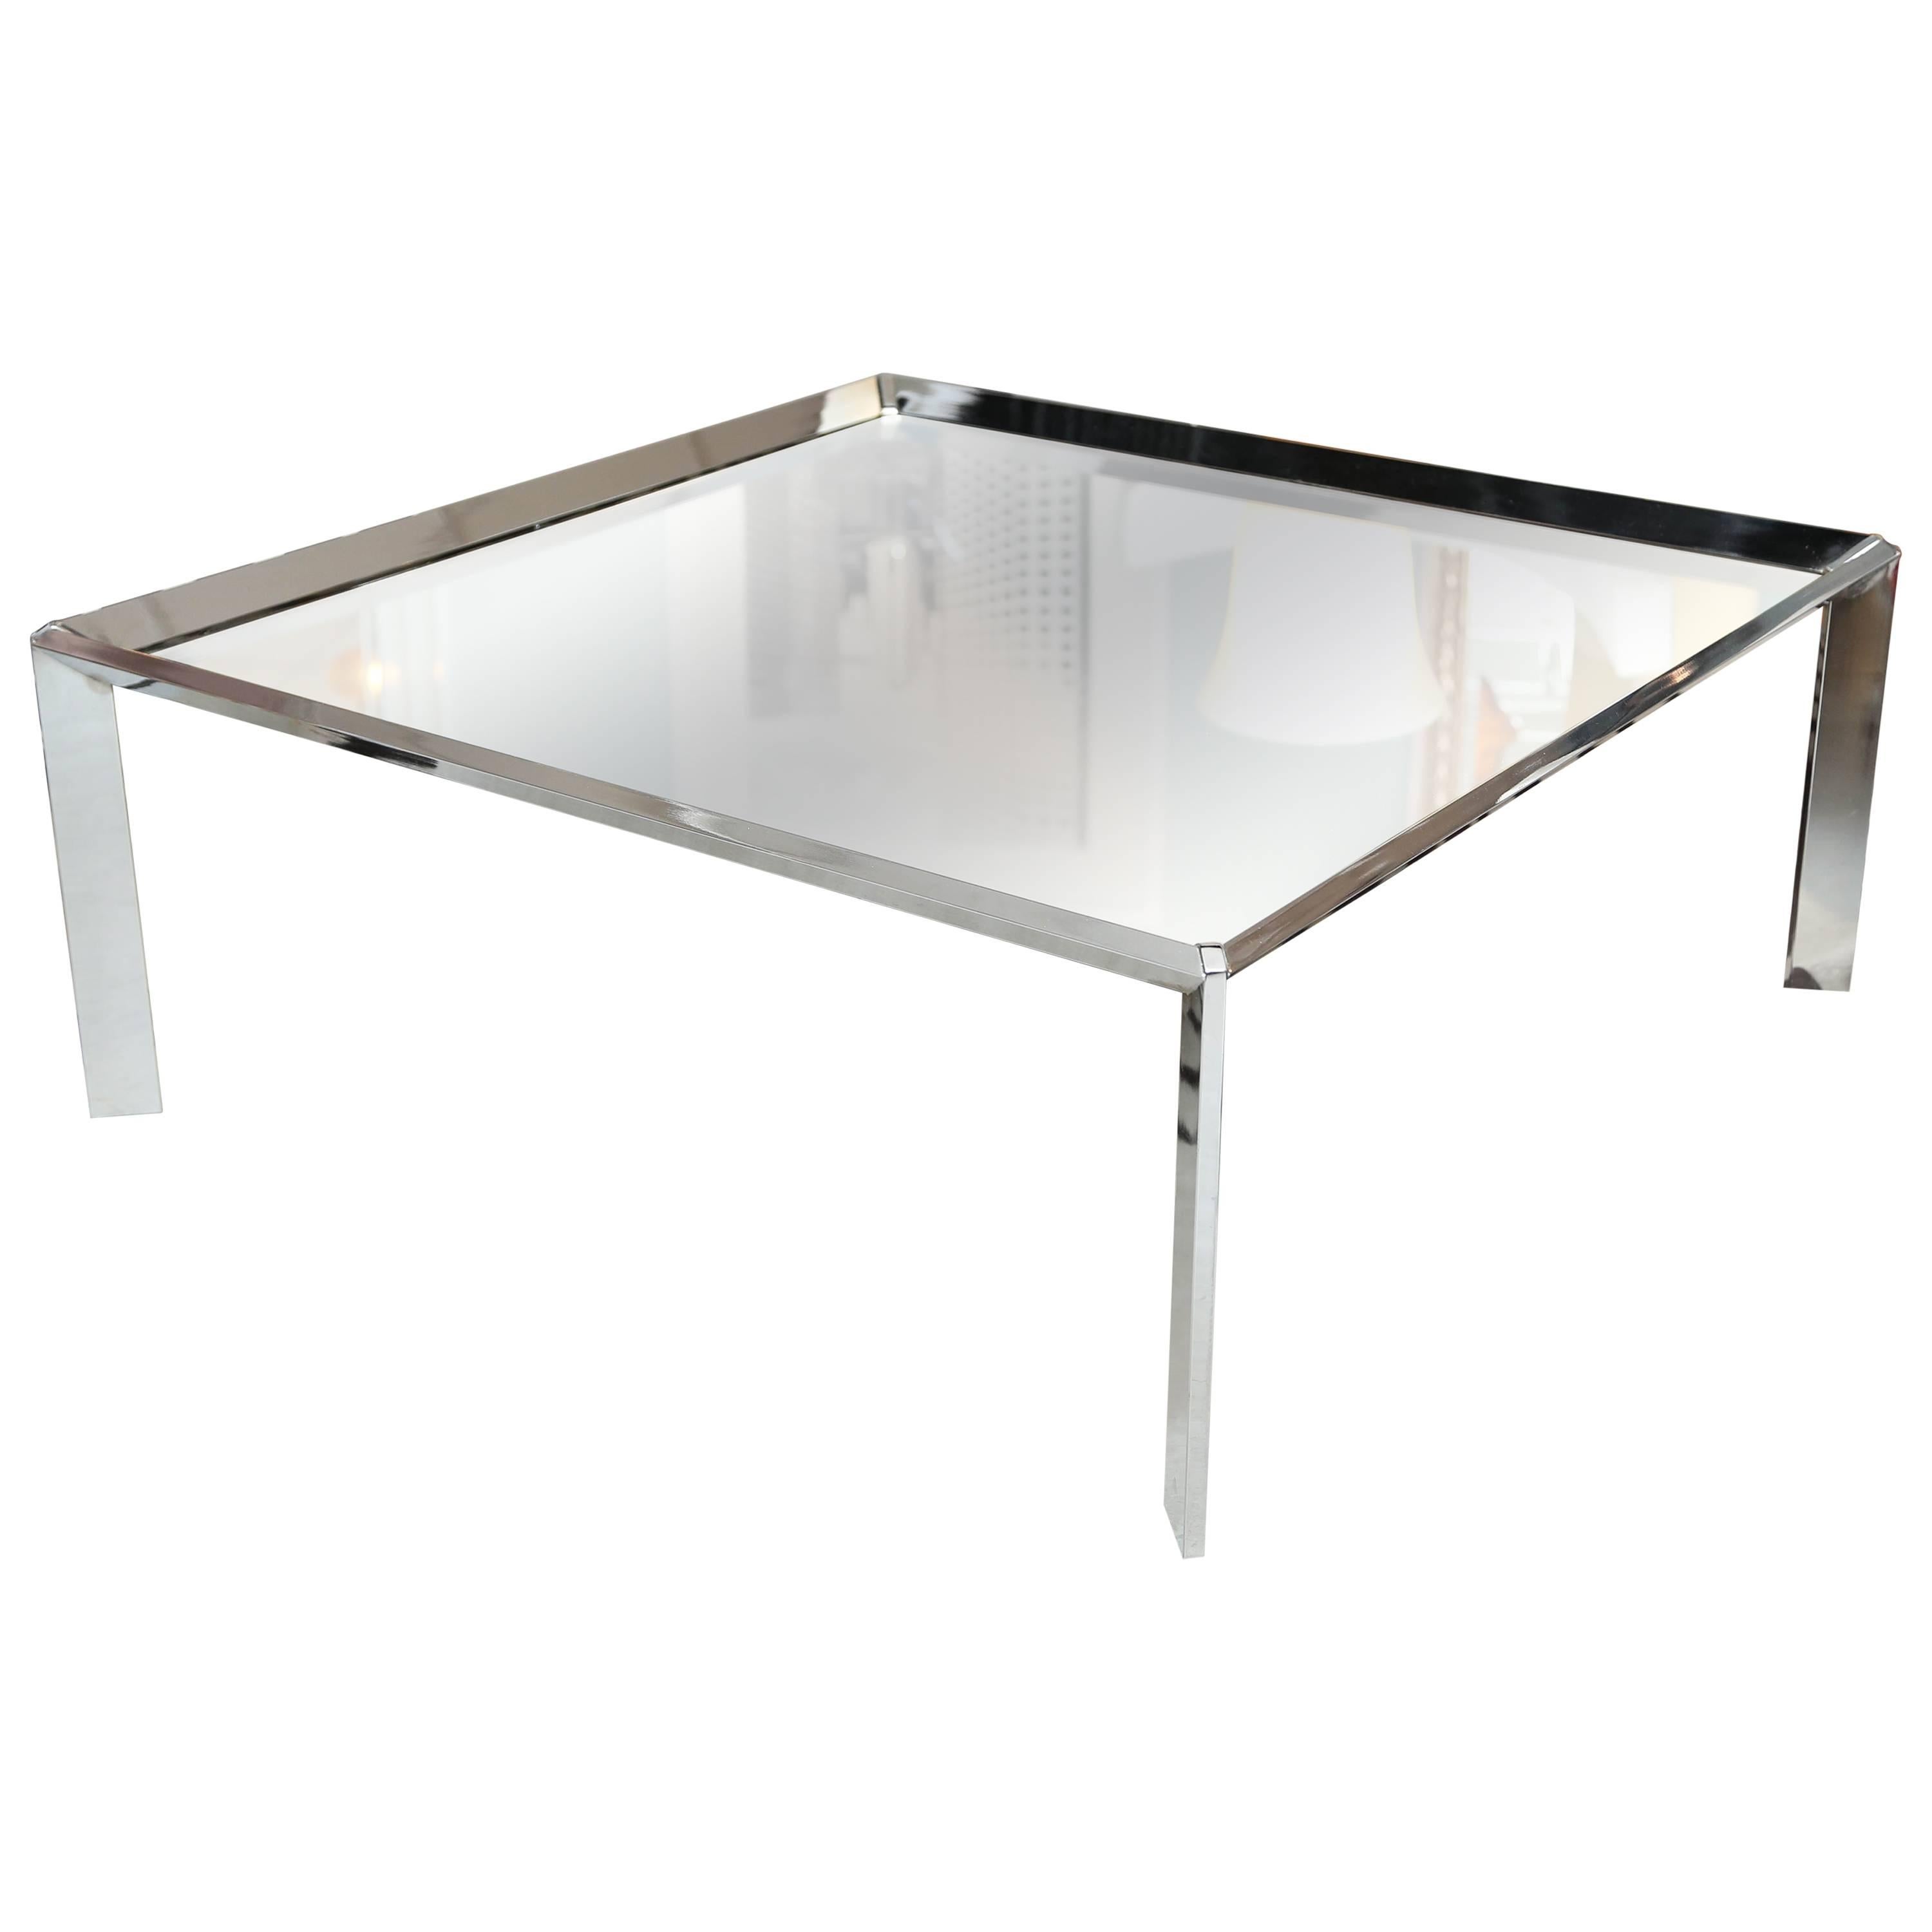 SALE! SALE! SALE! MIRROR COFFEE TABLE with Steel  legs, Contemporary, Chic For Sale